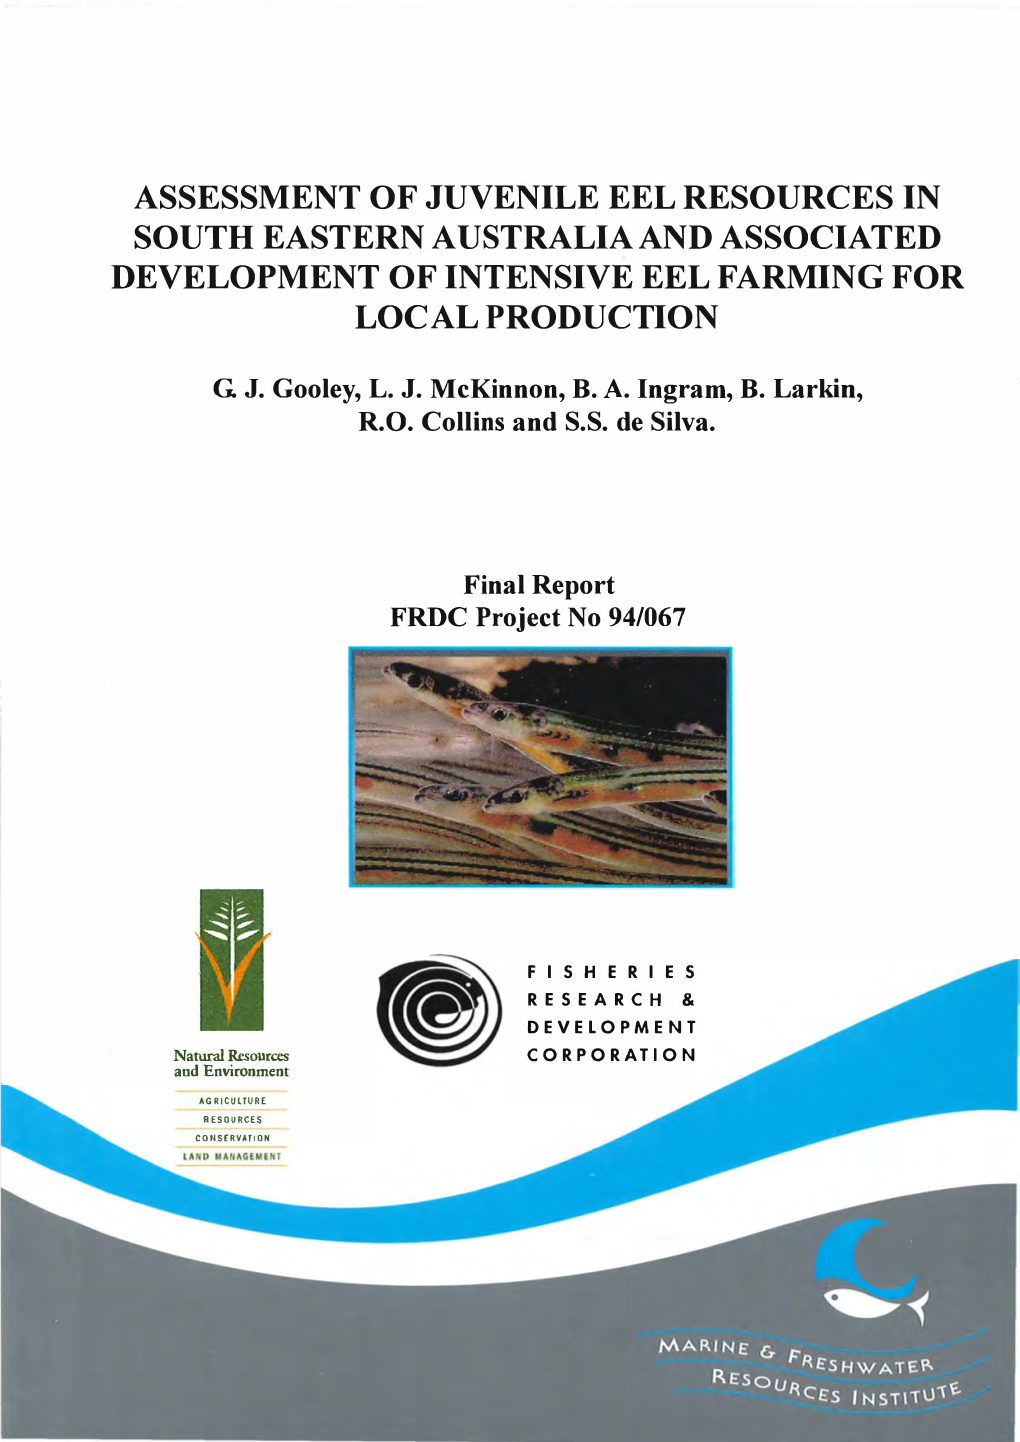 Assessment of Juvenile Eel Resources in South Eastern Australia and Associated Development of Intensive Eel Farming for Local Production